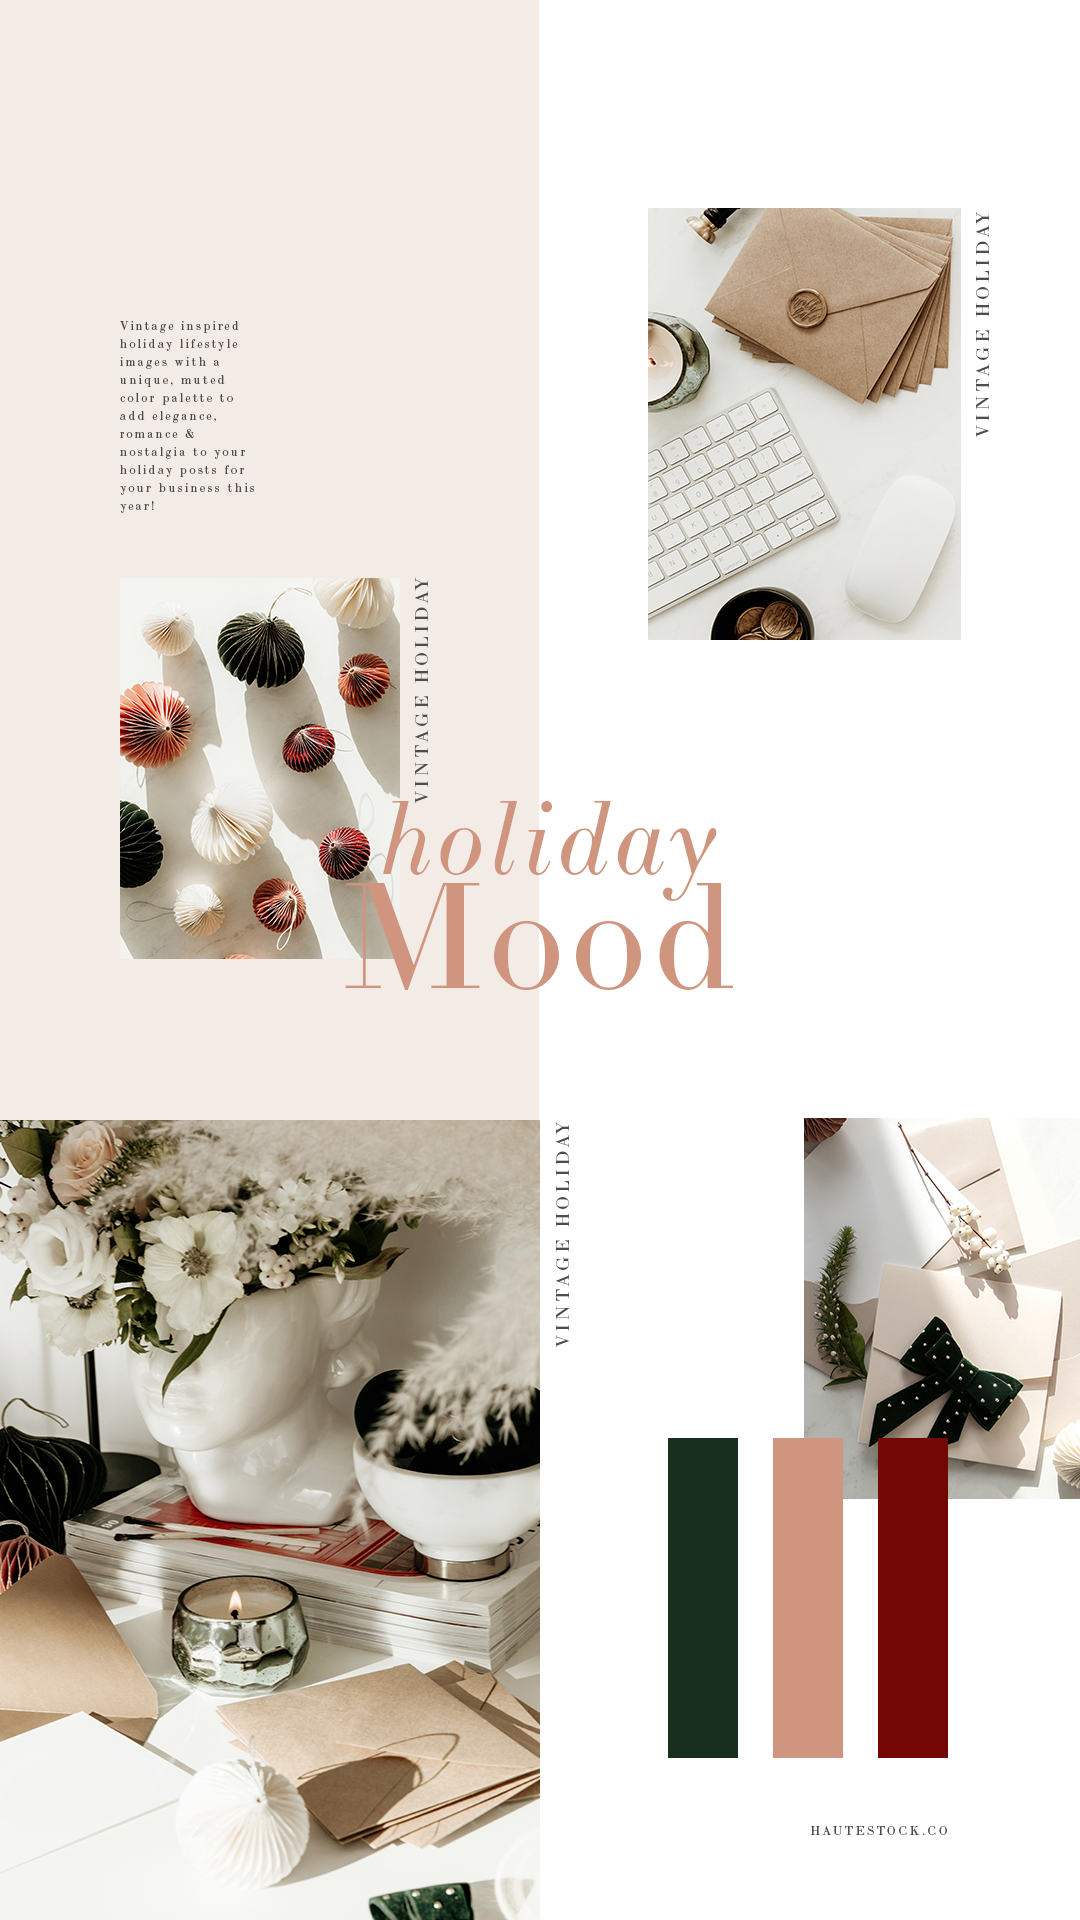 Vintage inspired holiday lifestyle images with a unique, muted color palette to add elegance, romance & nostalgia to your holiday posts for your business this year!